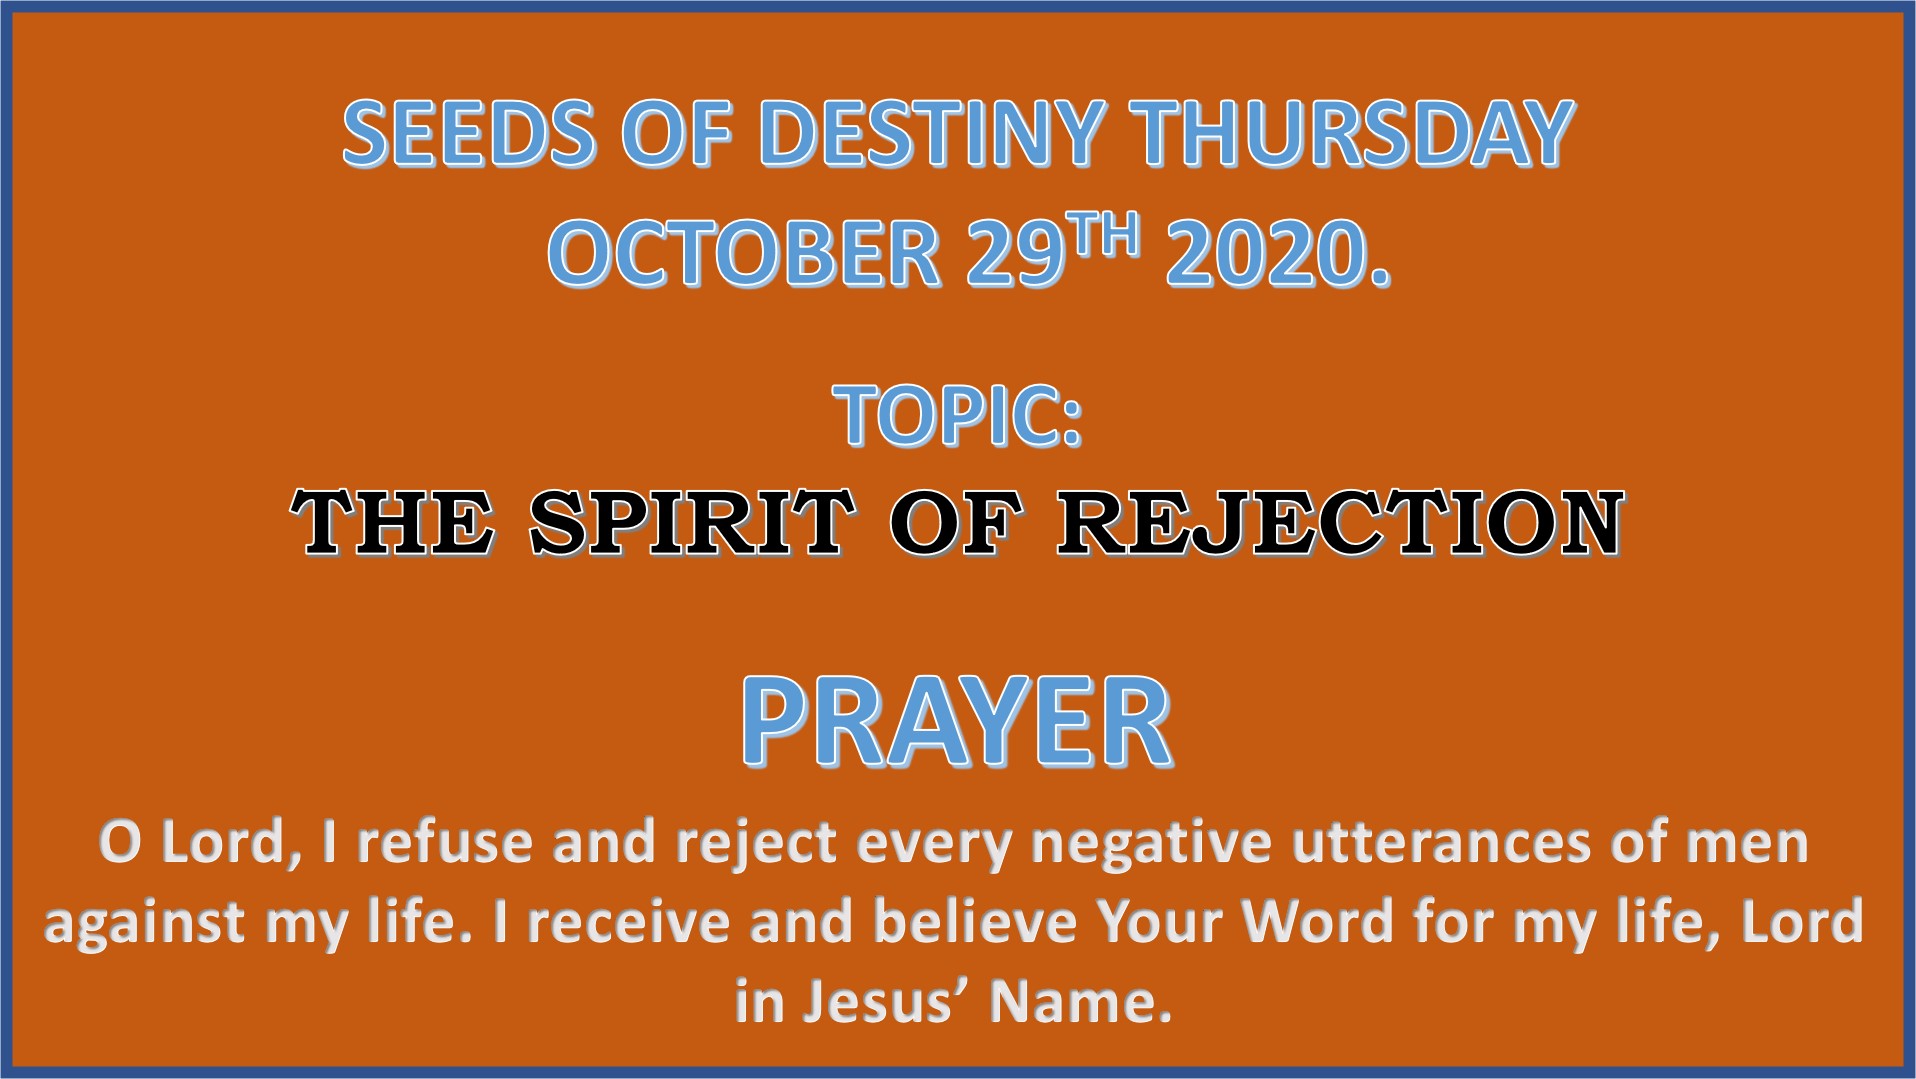 Seeds of Destiny Thursday 29th October 2020 by Dr Paul Enenche